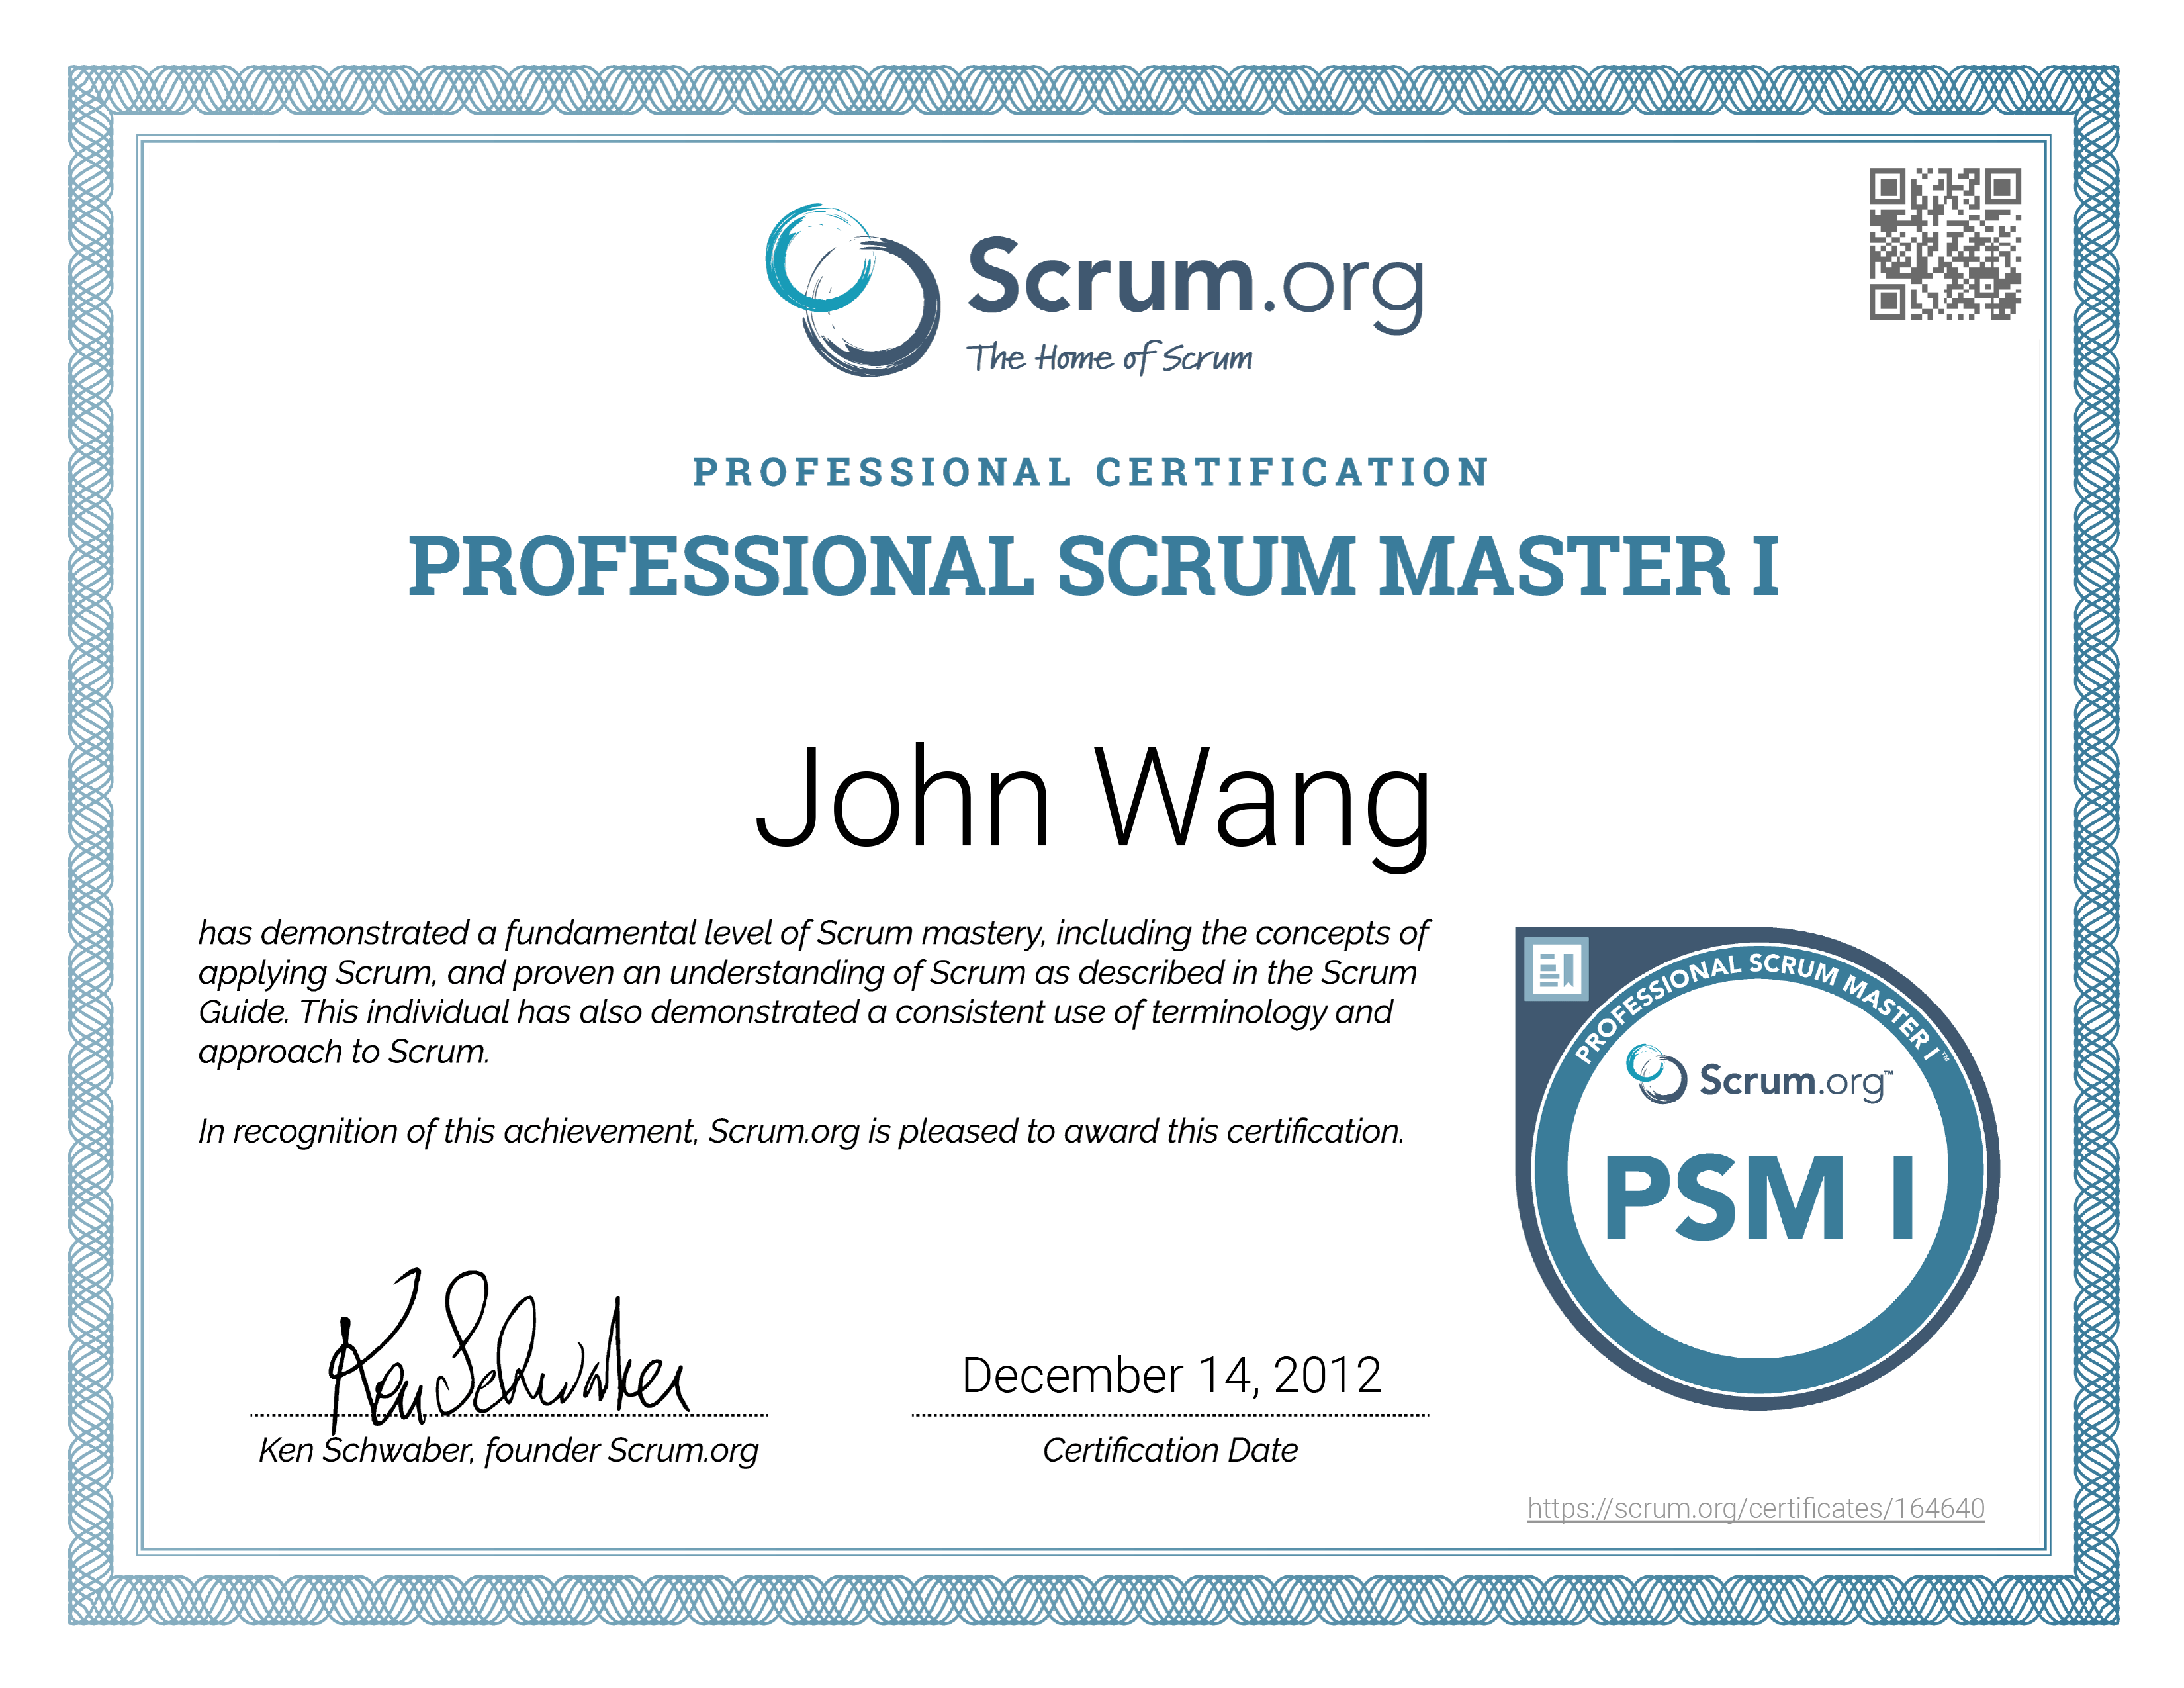 John's Professional Scrum Master I (PSM I) from Scrum.org